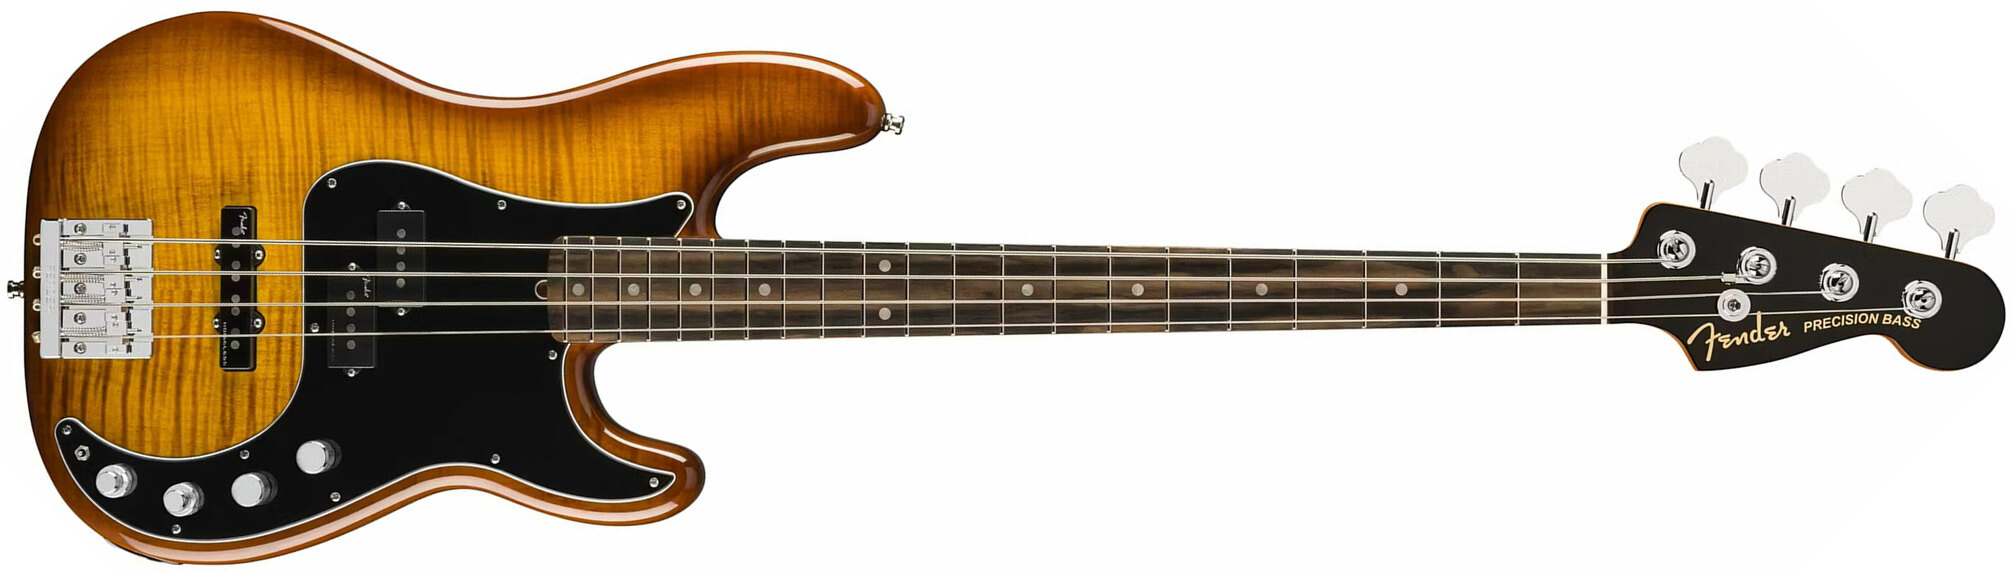 Fender Precision Bass American Ultra Usa Ltd Eb - Tiger's Eye - Solid body electric bass - Main picture